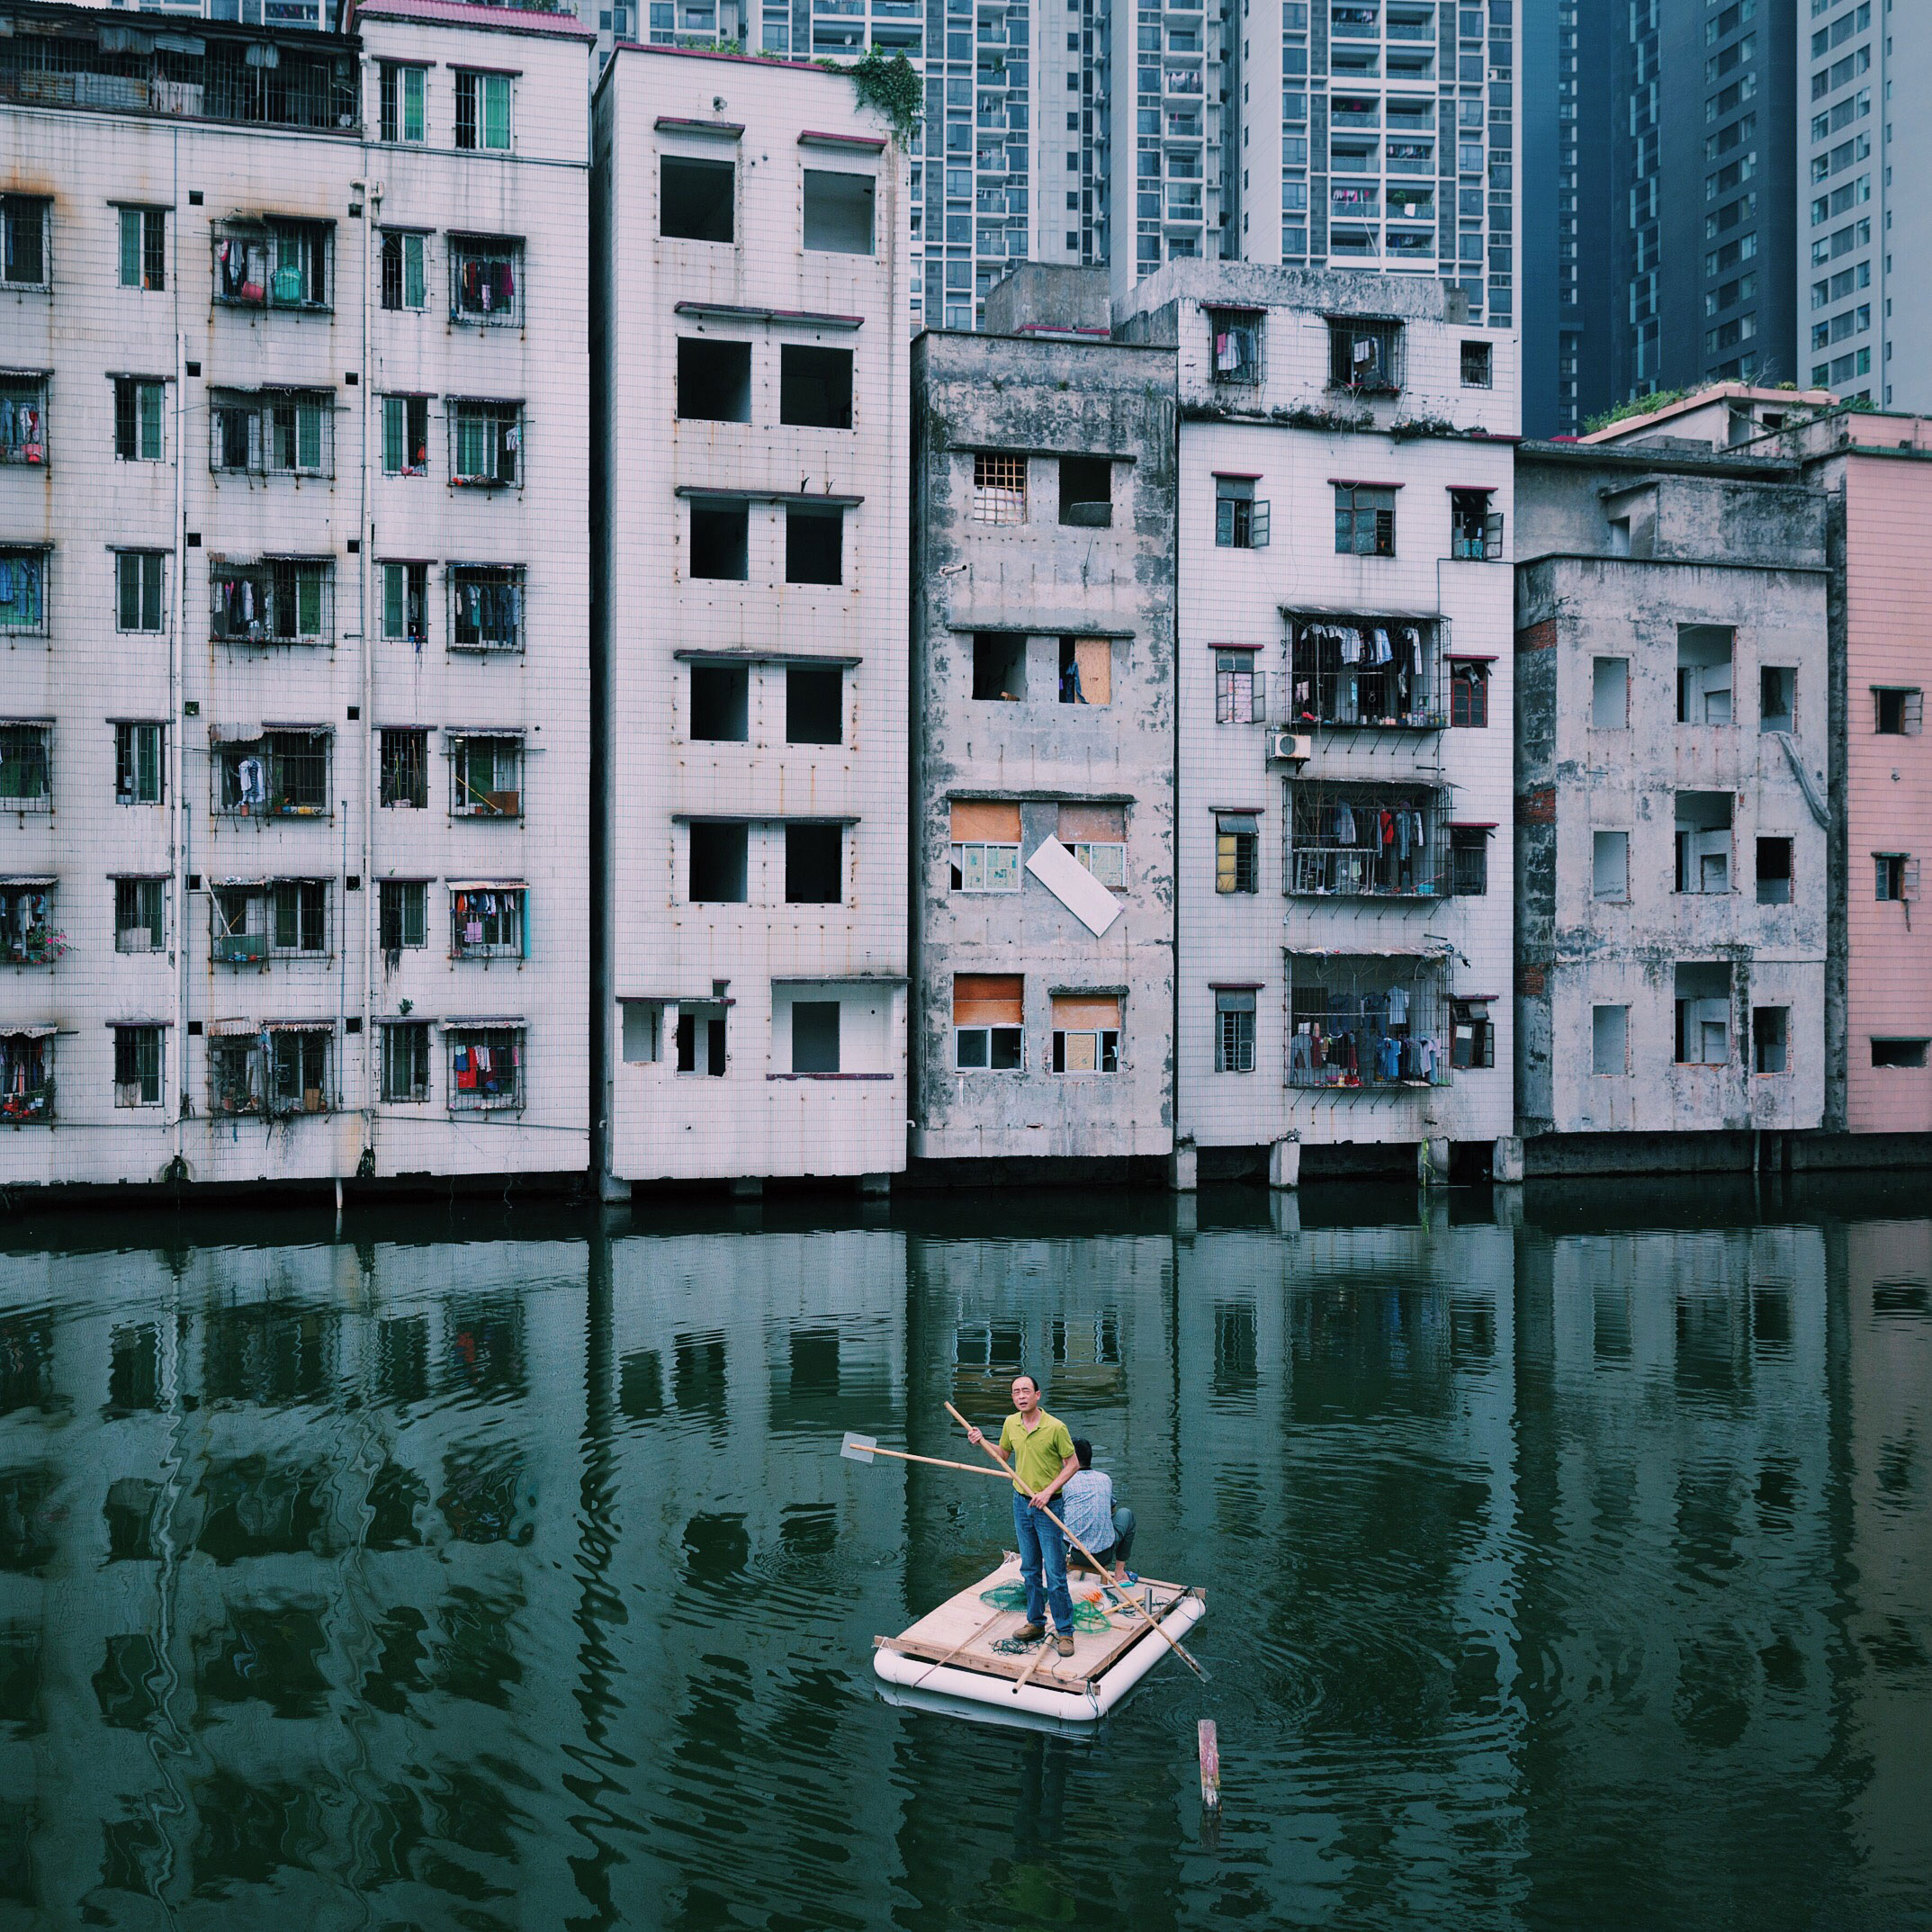 Two men fish in a pond in Xian Village, which is in the city center of Guangzhou, China. A conflict between locals and real estate developers lasts for more than seven years because of the uneven compensation and the corruption of Xian village leaders. (Yuyang Liu)